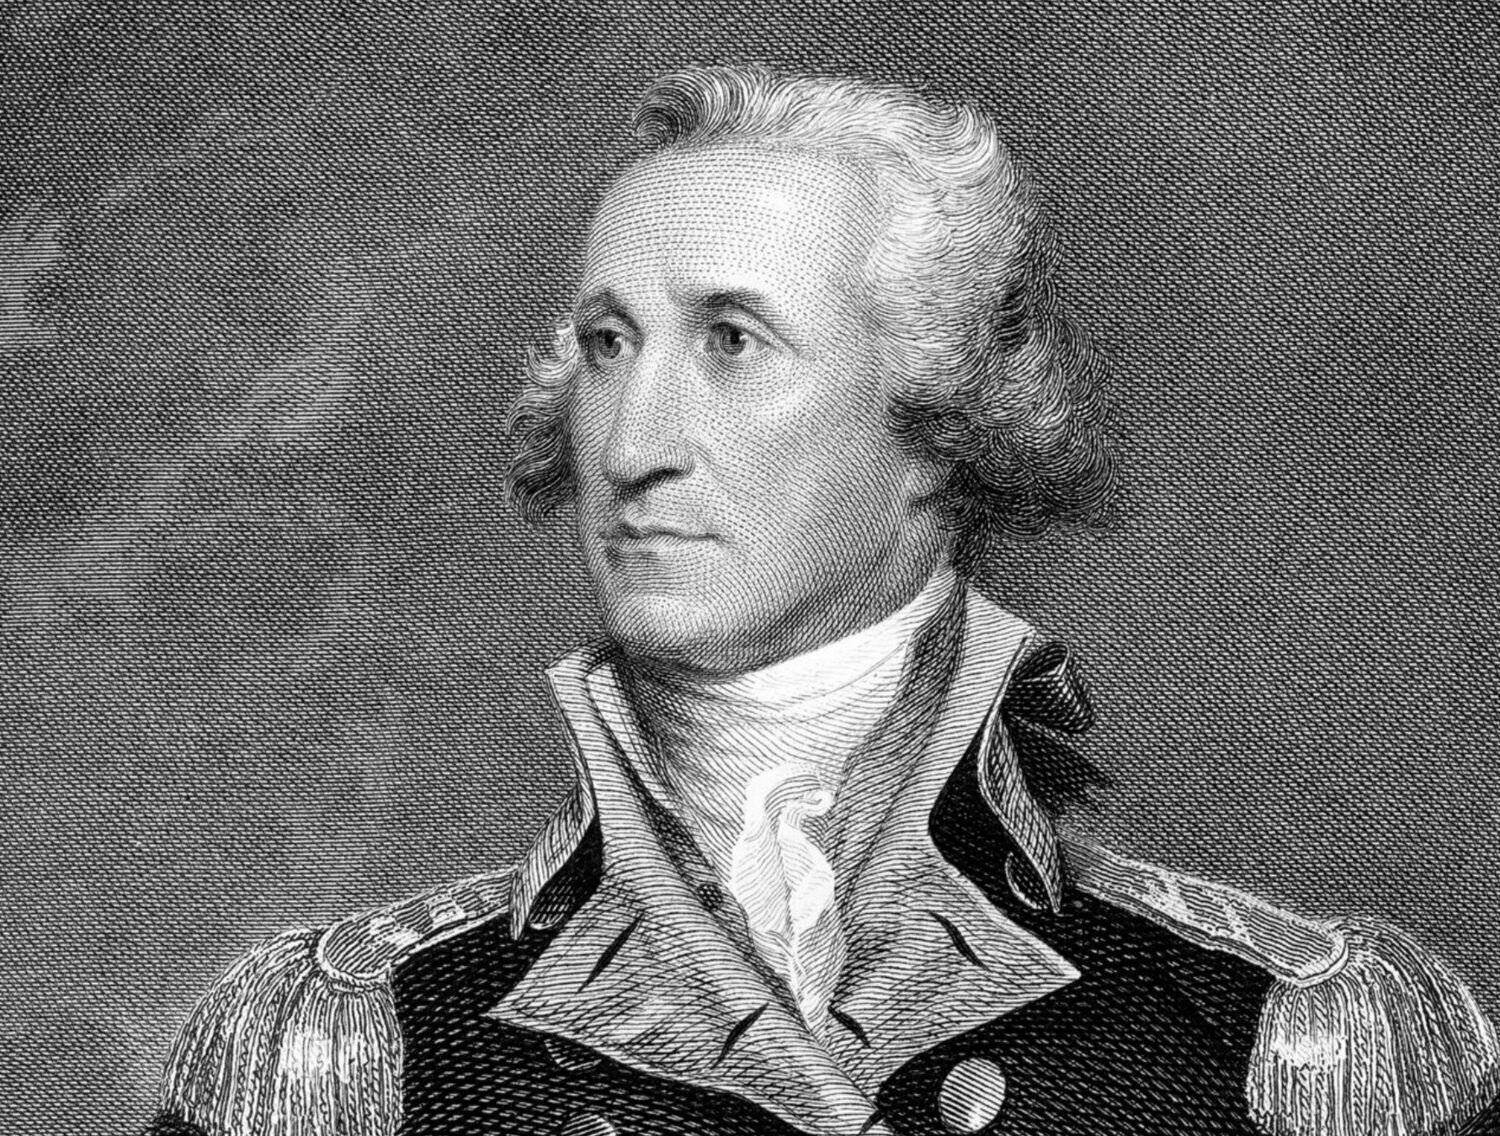 Uncovering the truth: Was this George Washington's worst decision?